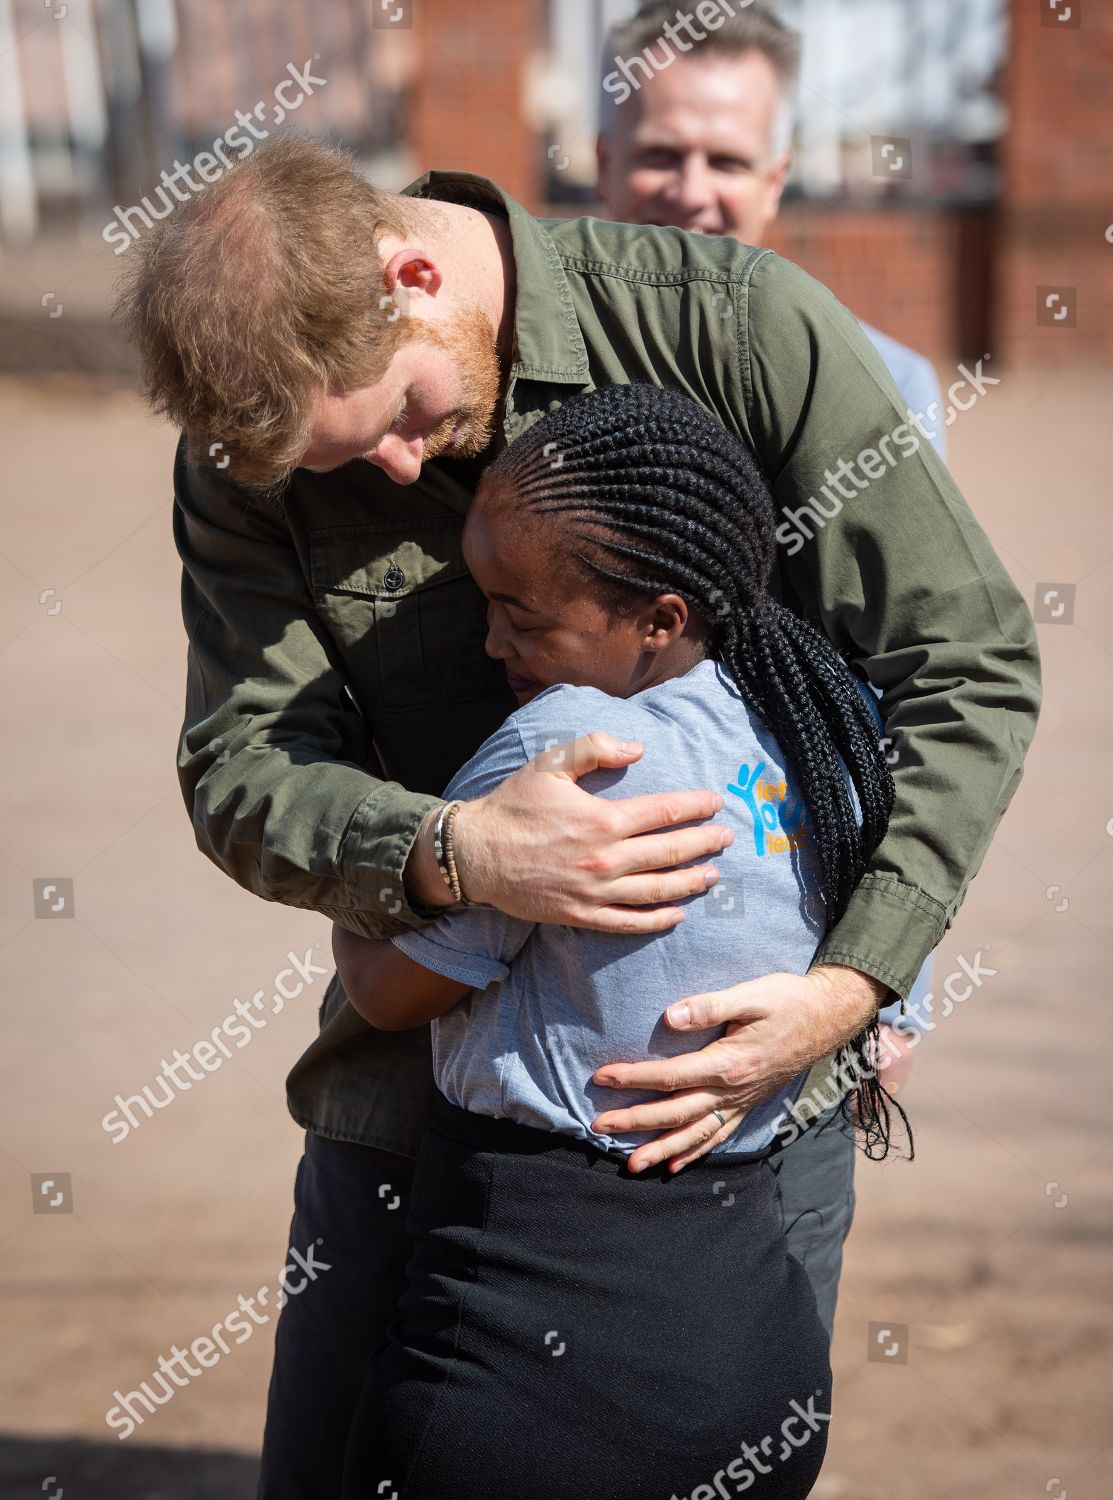 prince-harry-visit-to-africa-shutterstock-editorial-10424667am.jpg